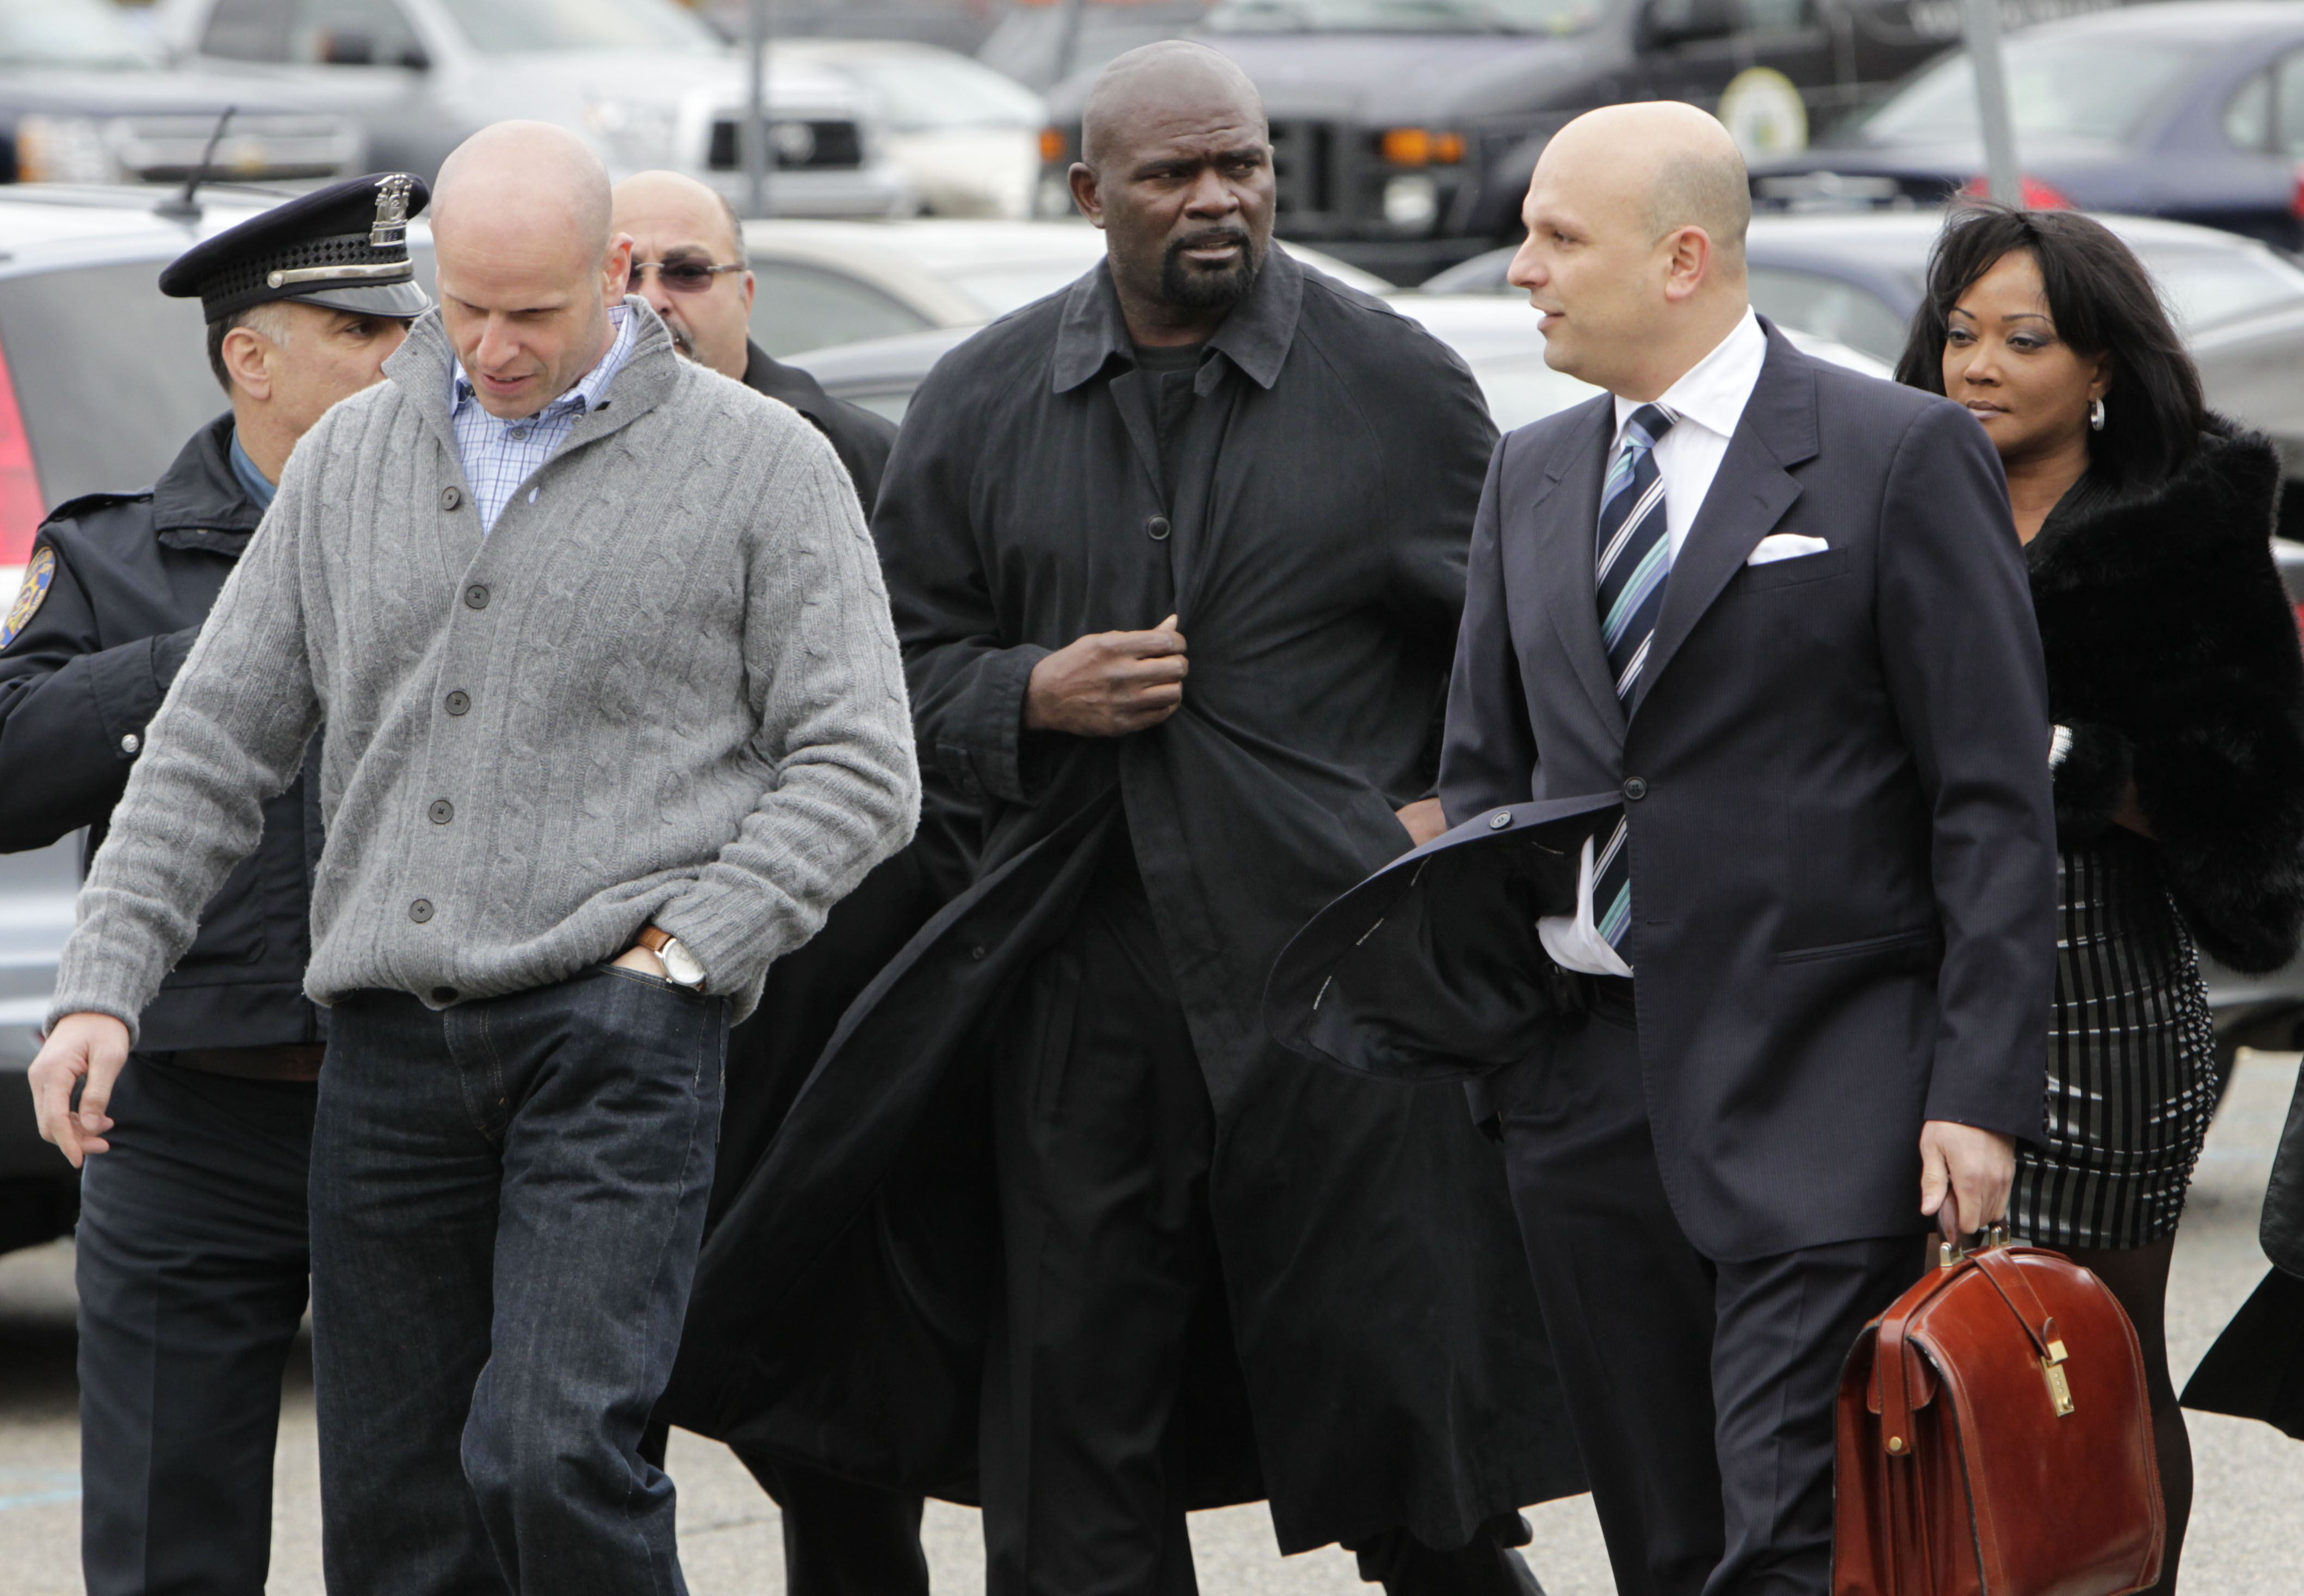 Lawrence Taylor arrives to the Rockland County Courthouse in New City, N.Y., Tuesday, March 22, 2011.  (Seth Wenig)